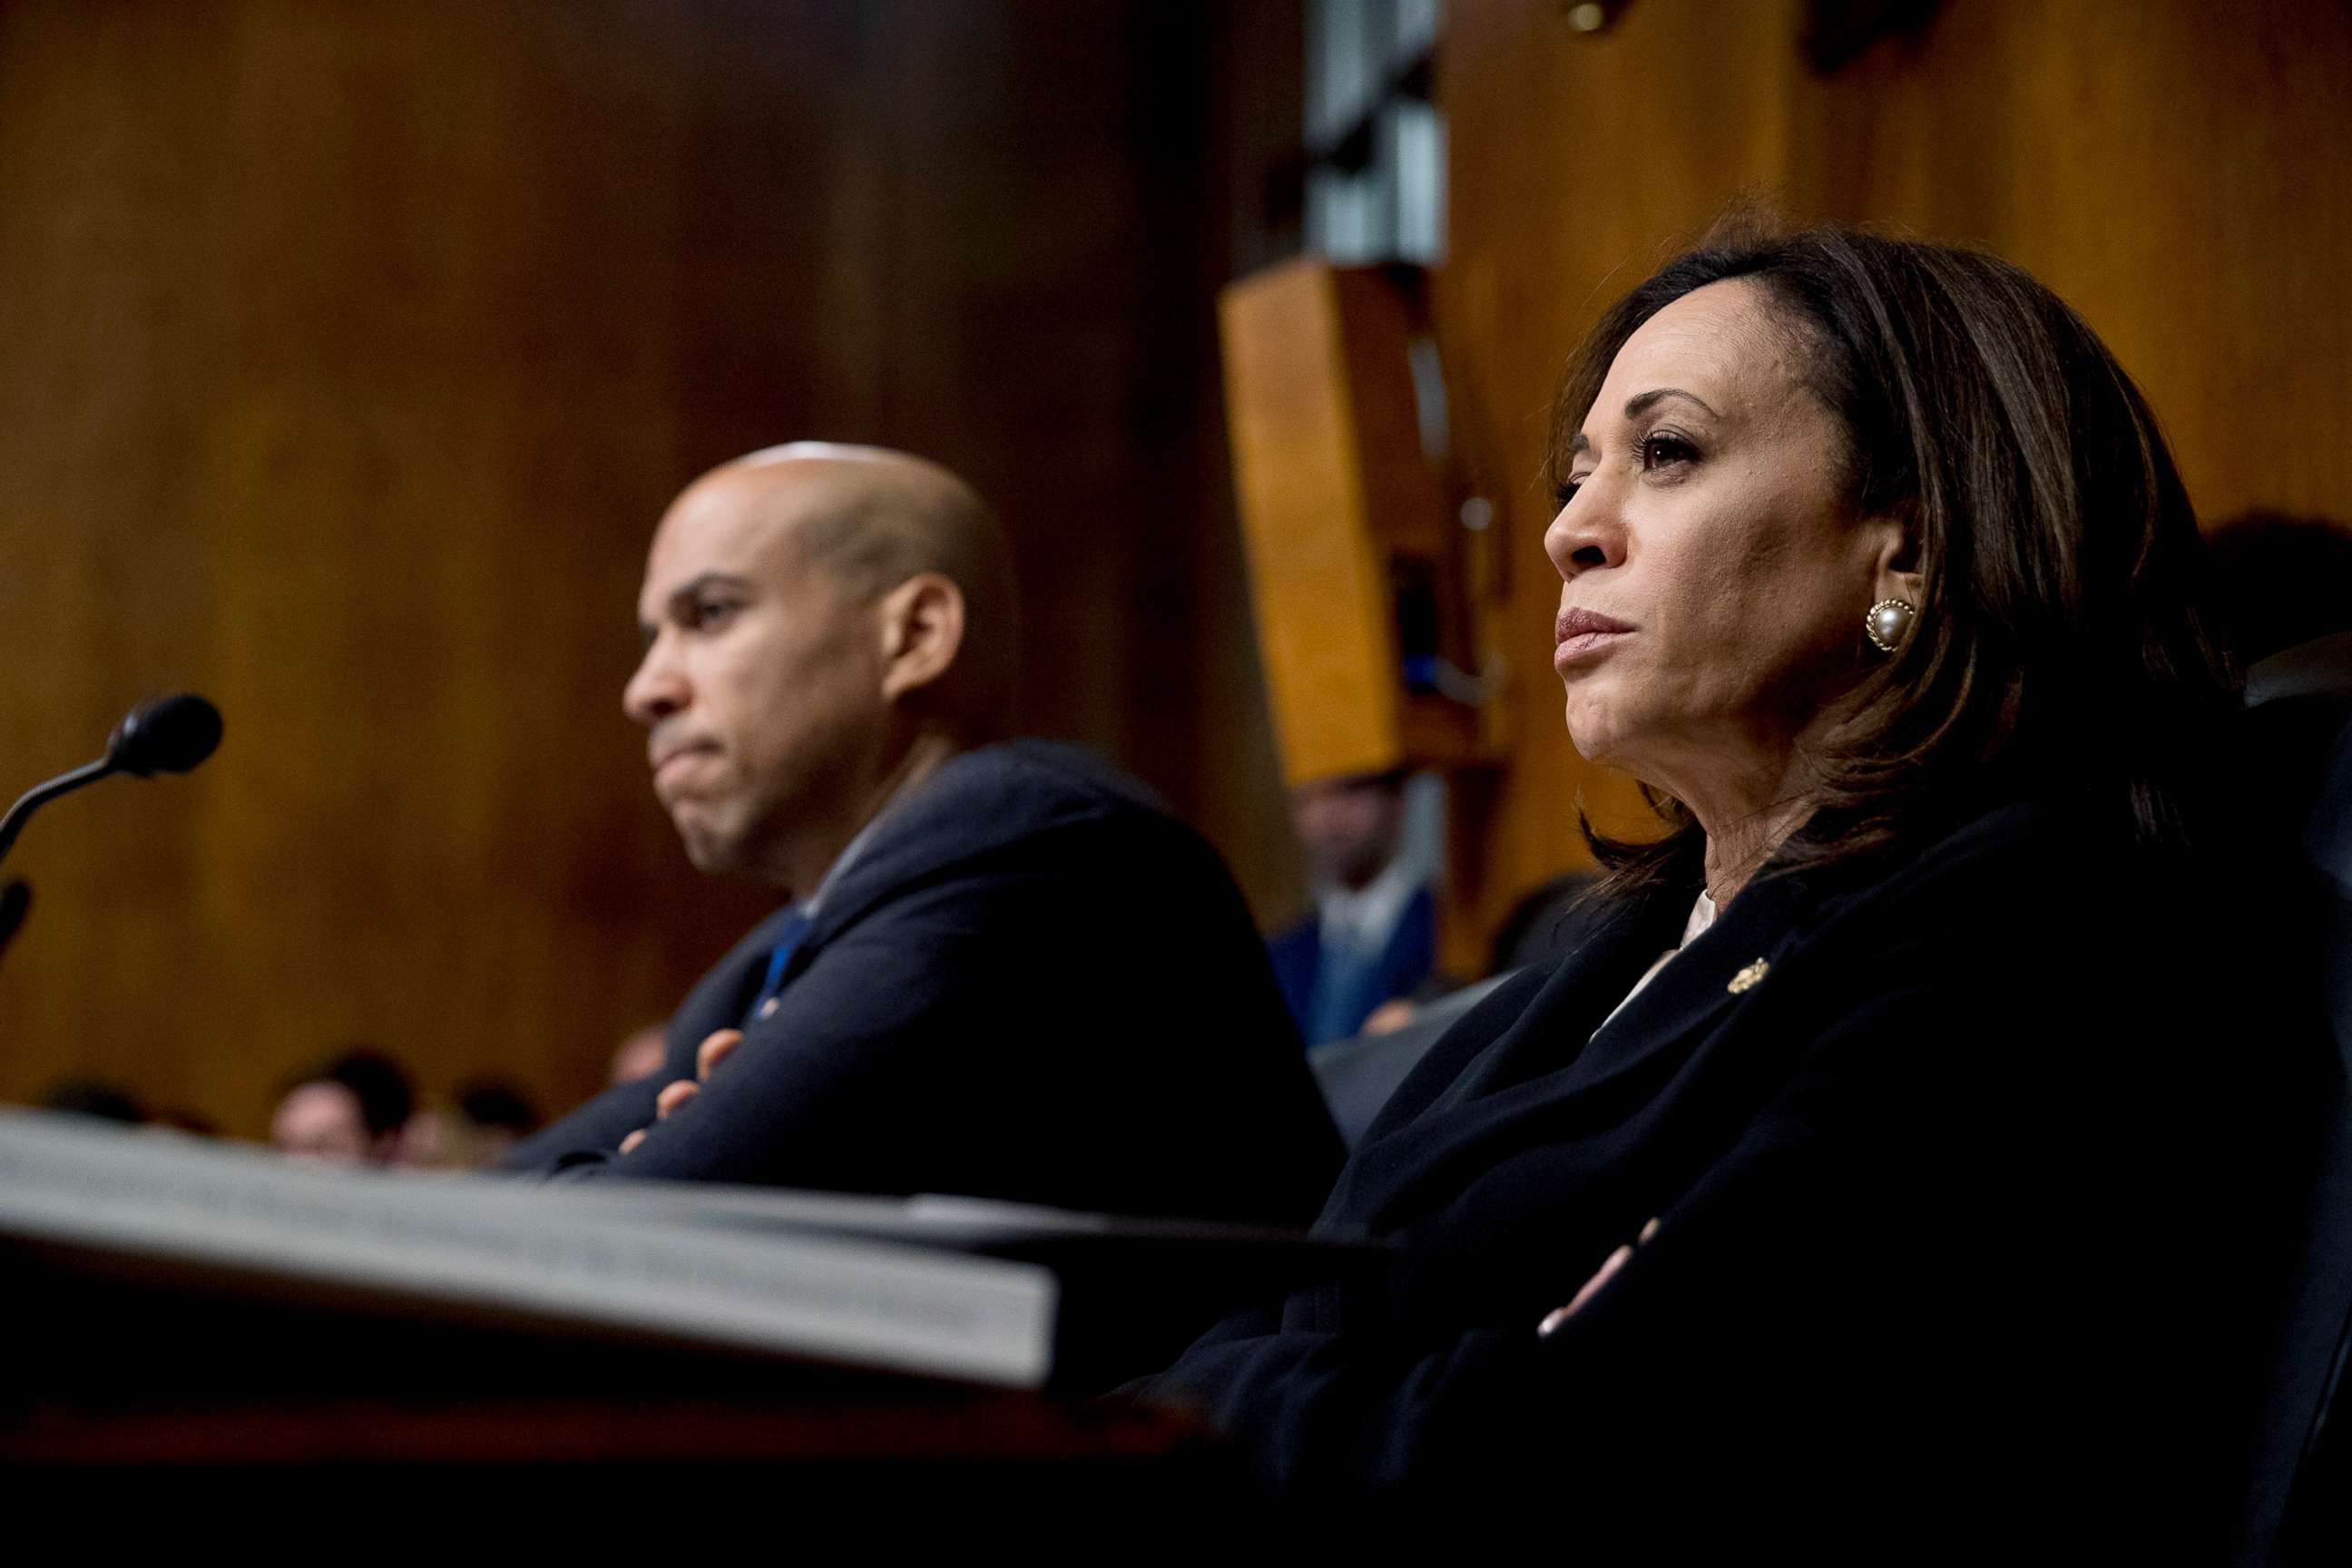 PHOTO: Democratic presidential candidates Sen. Cory Booker, left, and Sen. Kamala Harris, right, listen as Attorney General William Barr testifies during a Senate Judiciary Committee hearing on Capitol Hill in Washington, D.C., May 1, 2019.